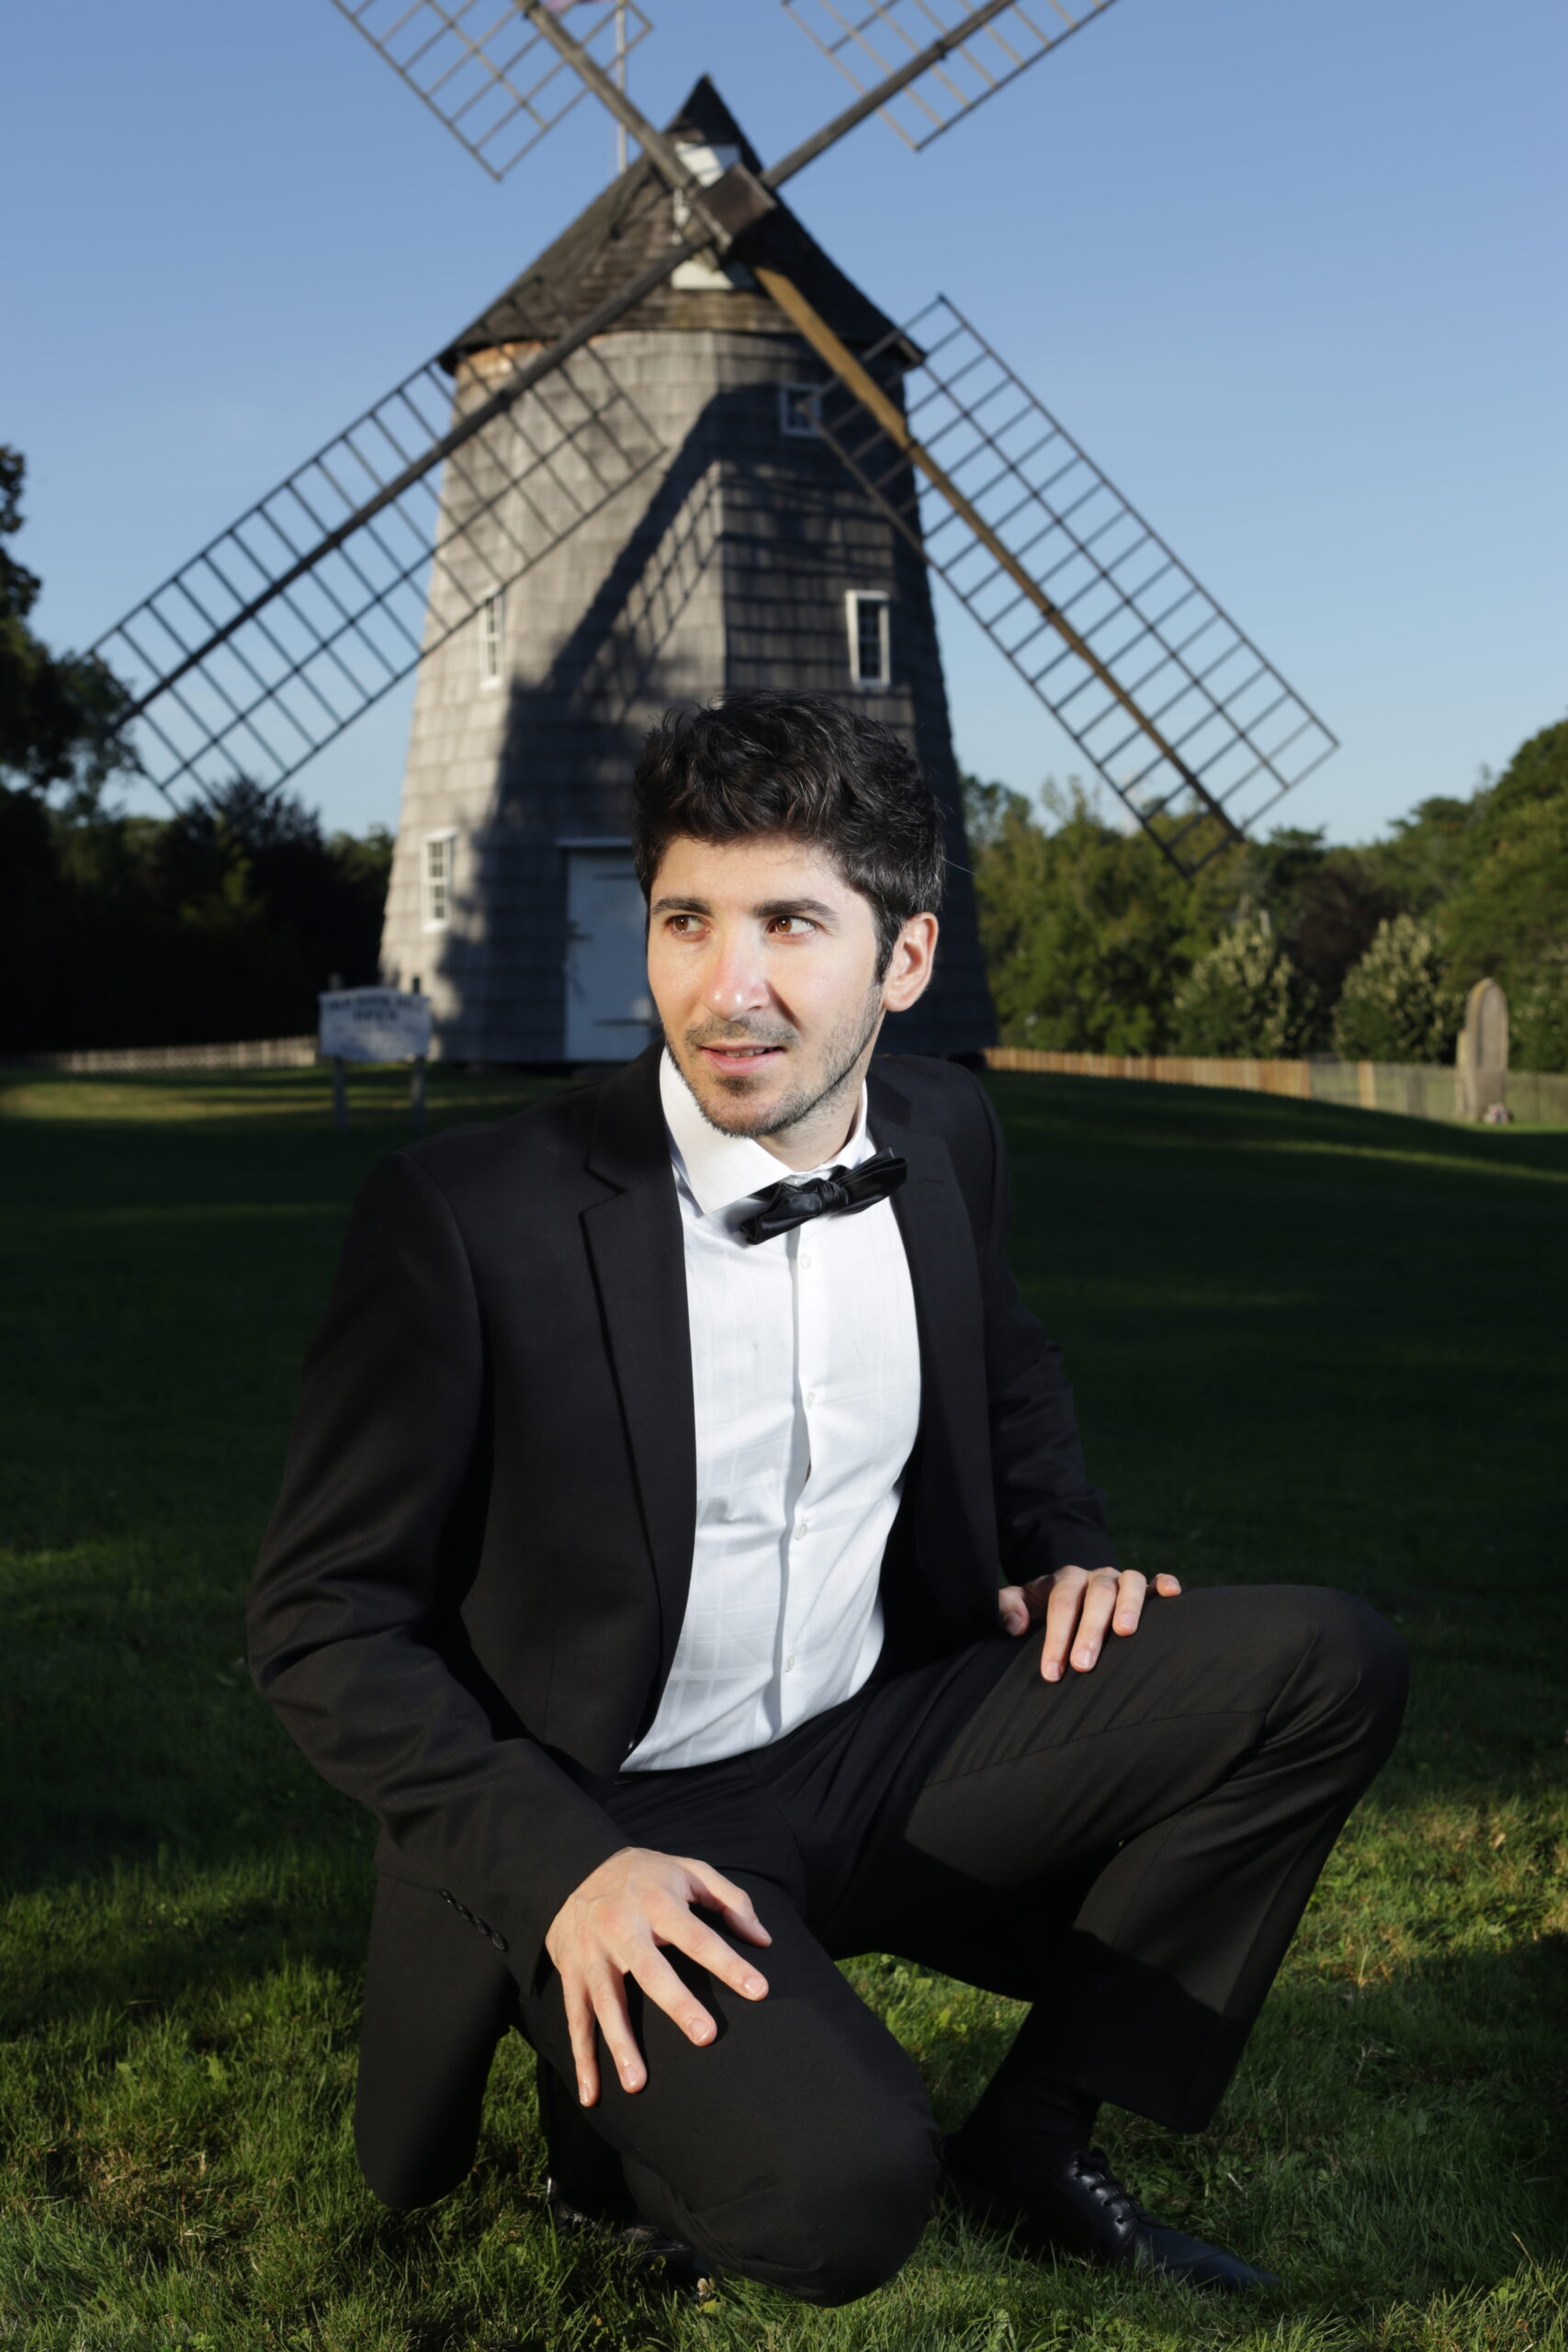 Pianist Niccolò Ronchi performs at the Parrish Art Museum with violinist Anastasiia Mazurok on October 7. COURTESY PARRISH ART MUSEUM